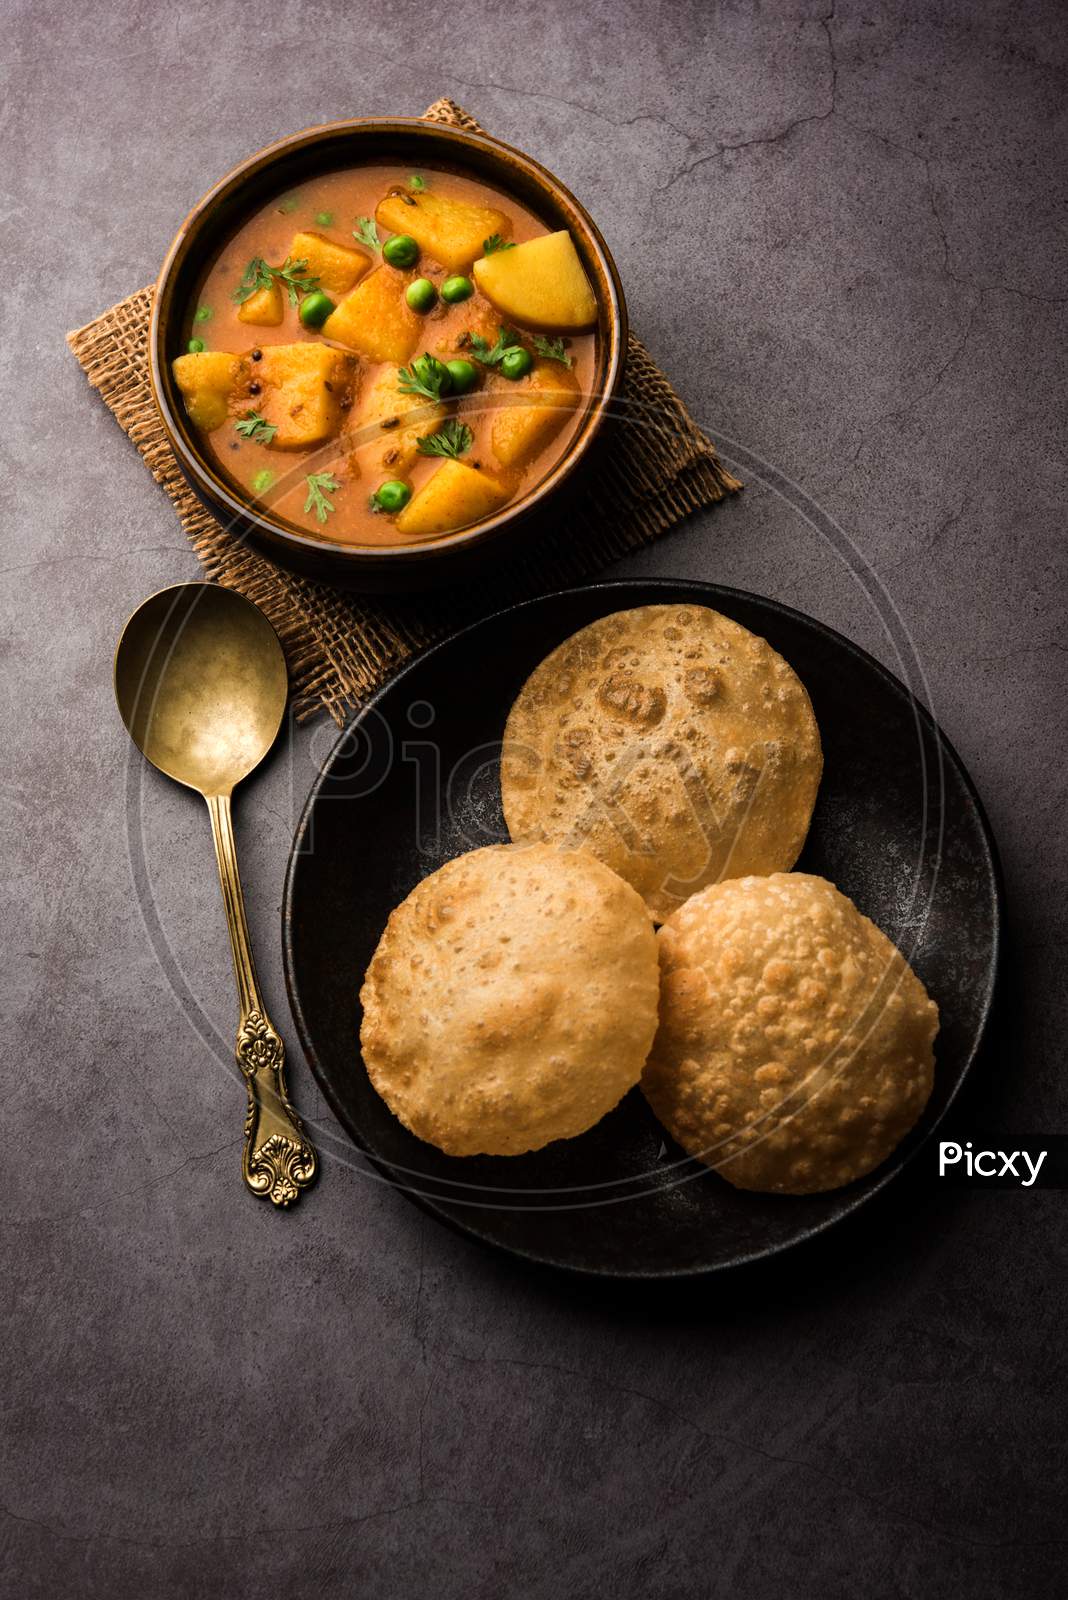 Aloo Puri or Potato curry with fried Poori, popular Indian breakfast / lunch / dinner menu.